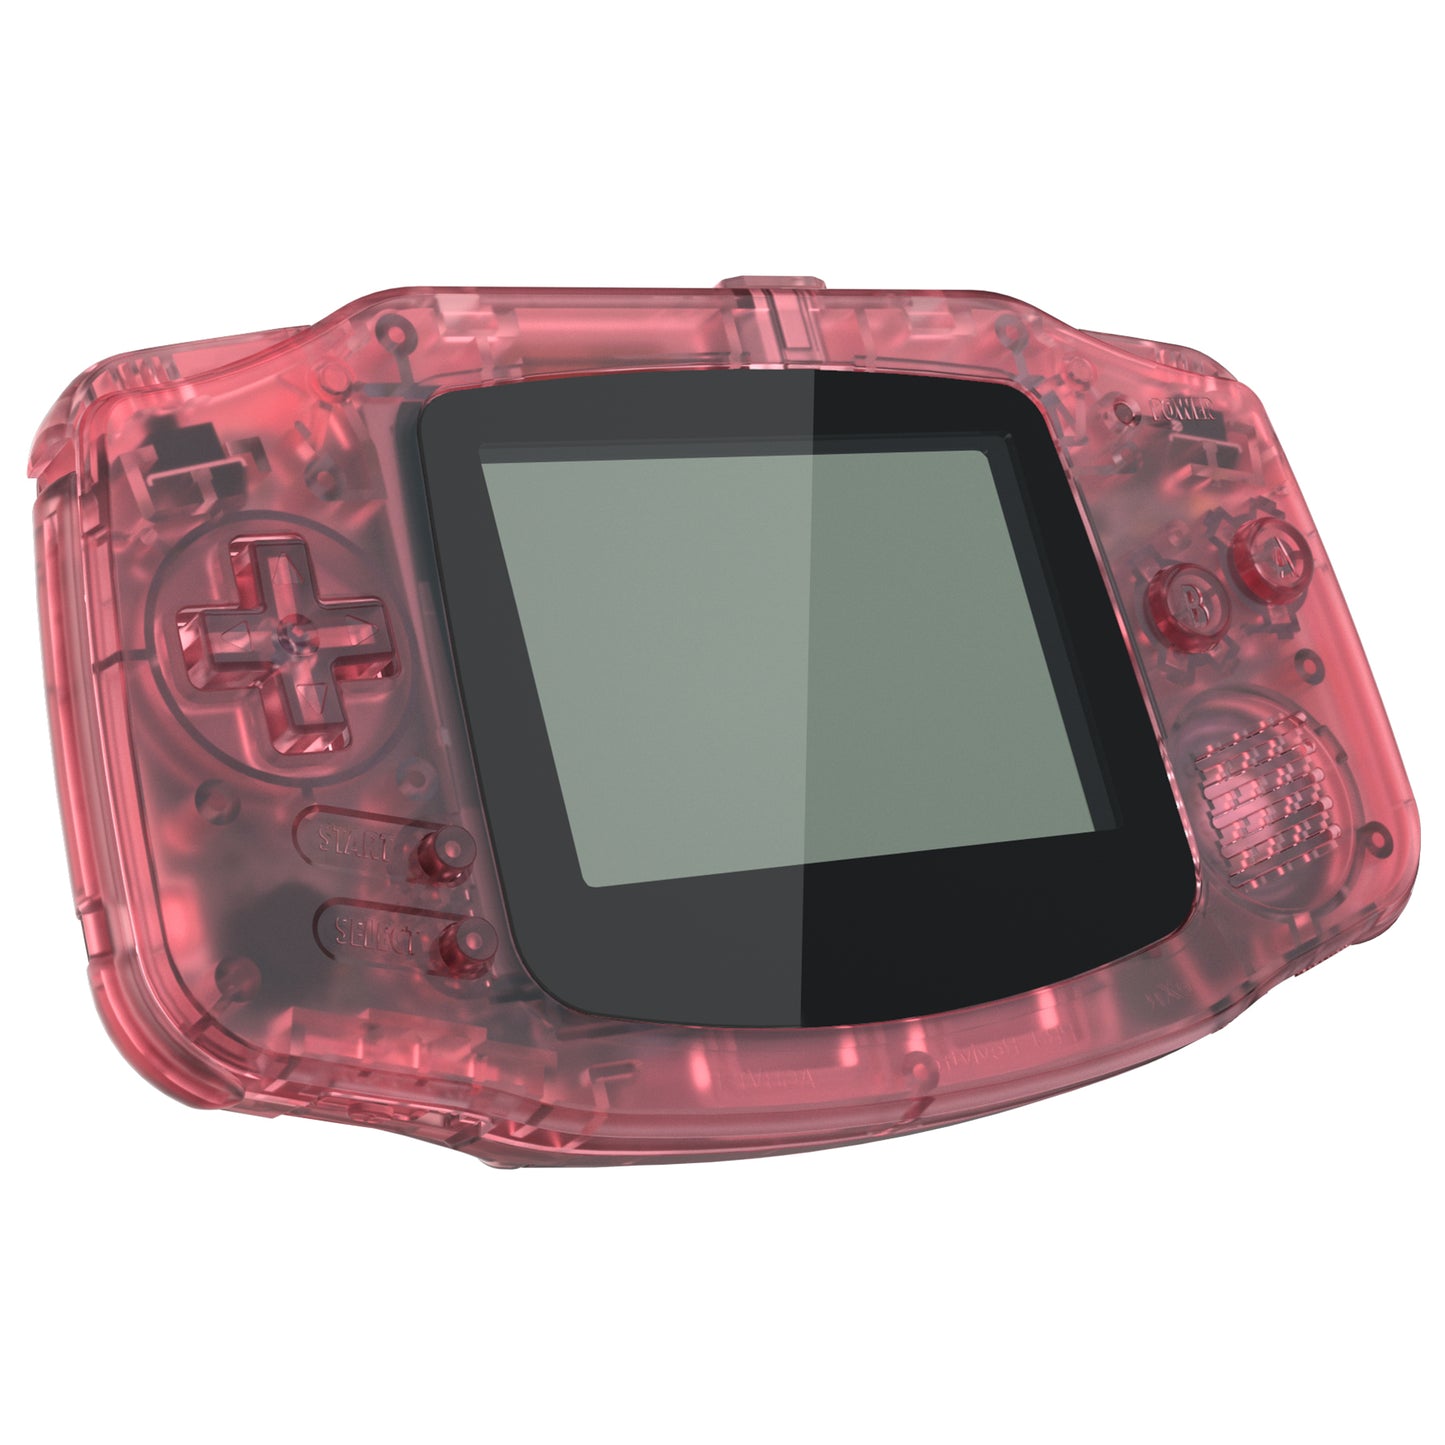 eXtremeRate Retail IPS Ready Upgraded eXtremeRate Cherry Pink Replacement Shell Full Housing Cover & Black Screen Lens for Gameboy Advance – Compatible with Both IPS & Standard LCD – Console & IPS Screen NOT Included - TAGM5007B